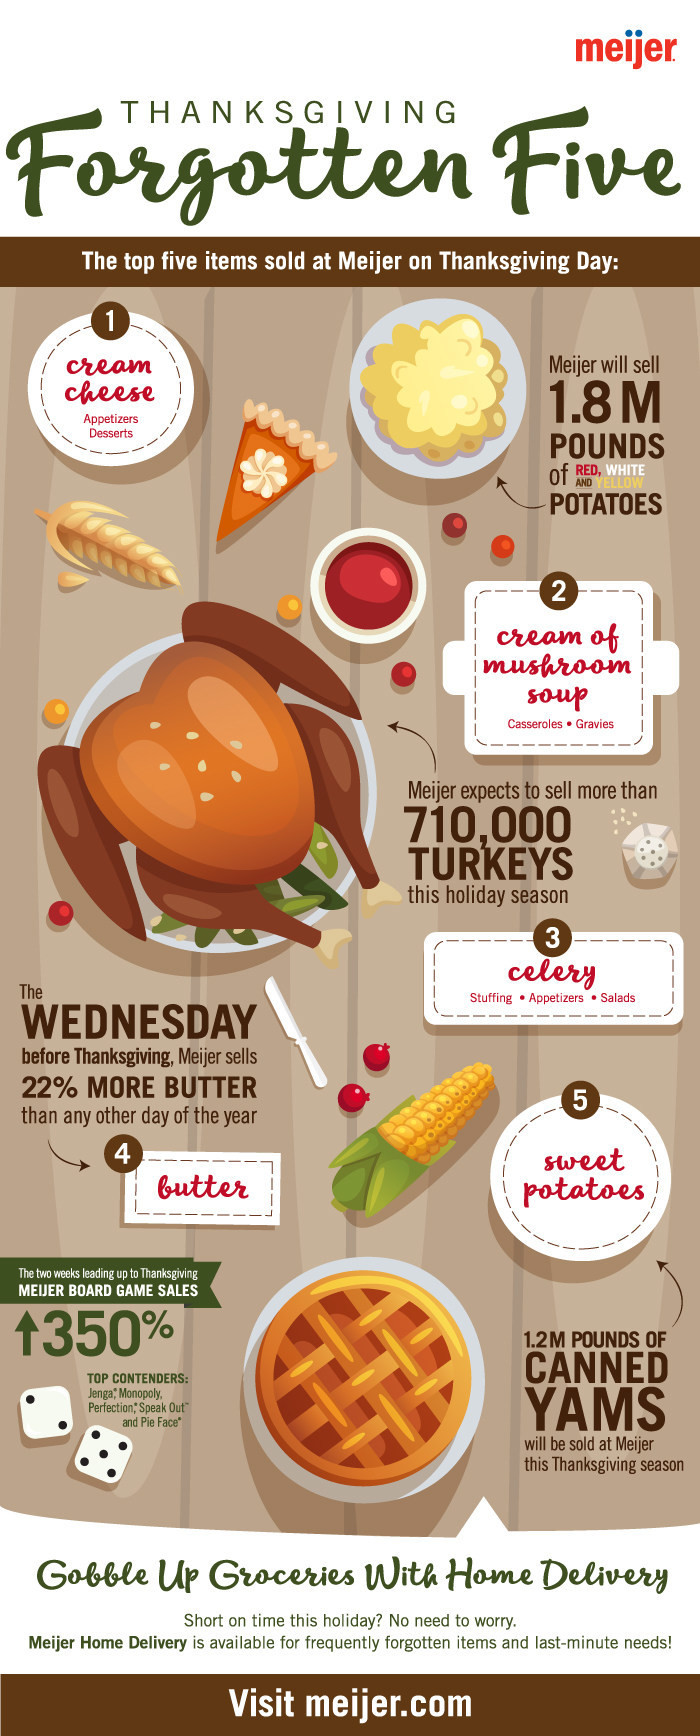 Meijer Thanksgiving Dinners
 Meijer Expects to Lead the Midwest with Lowest Price per